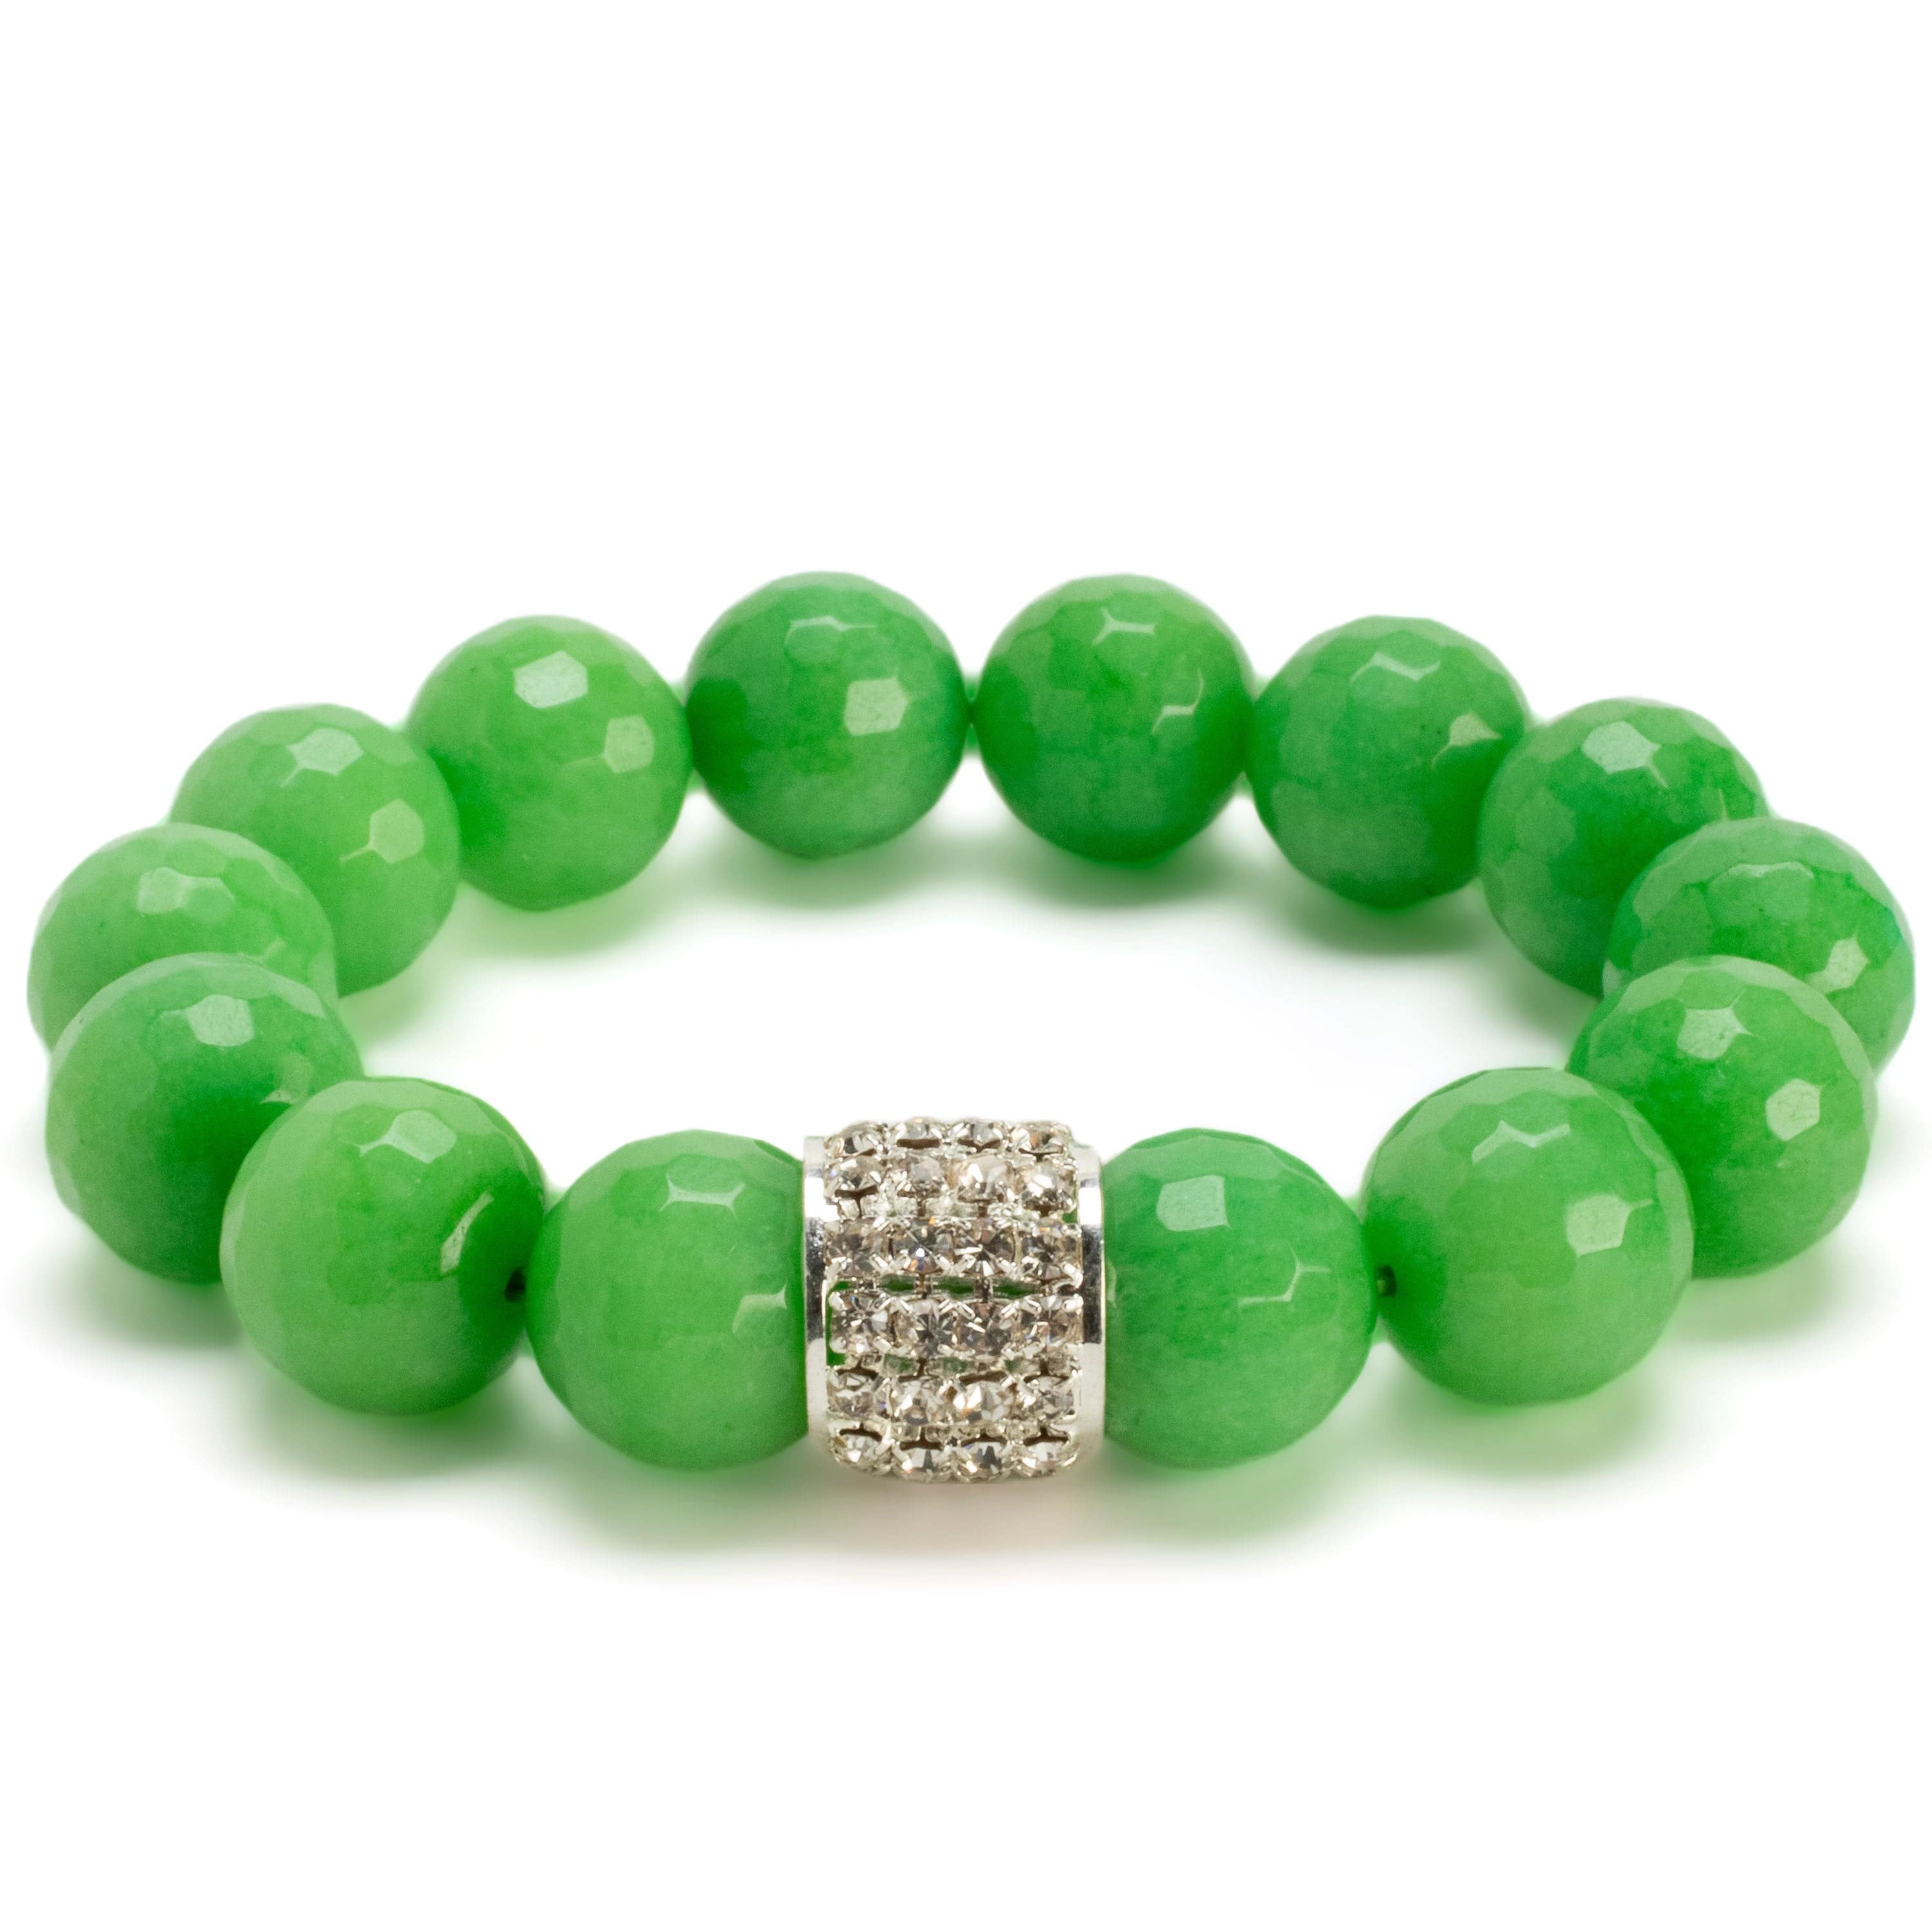 Kalifano Gemstone Bracelets Faceted 14mm Green Color Enhanced Jade with Sparkly Silver Crystal Accent Bead Gemstone Elastic Bracelet RED-BGP-065